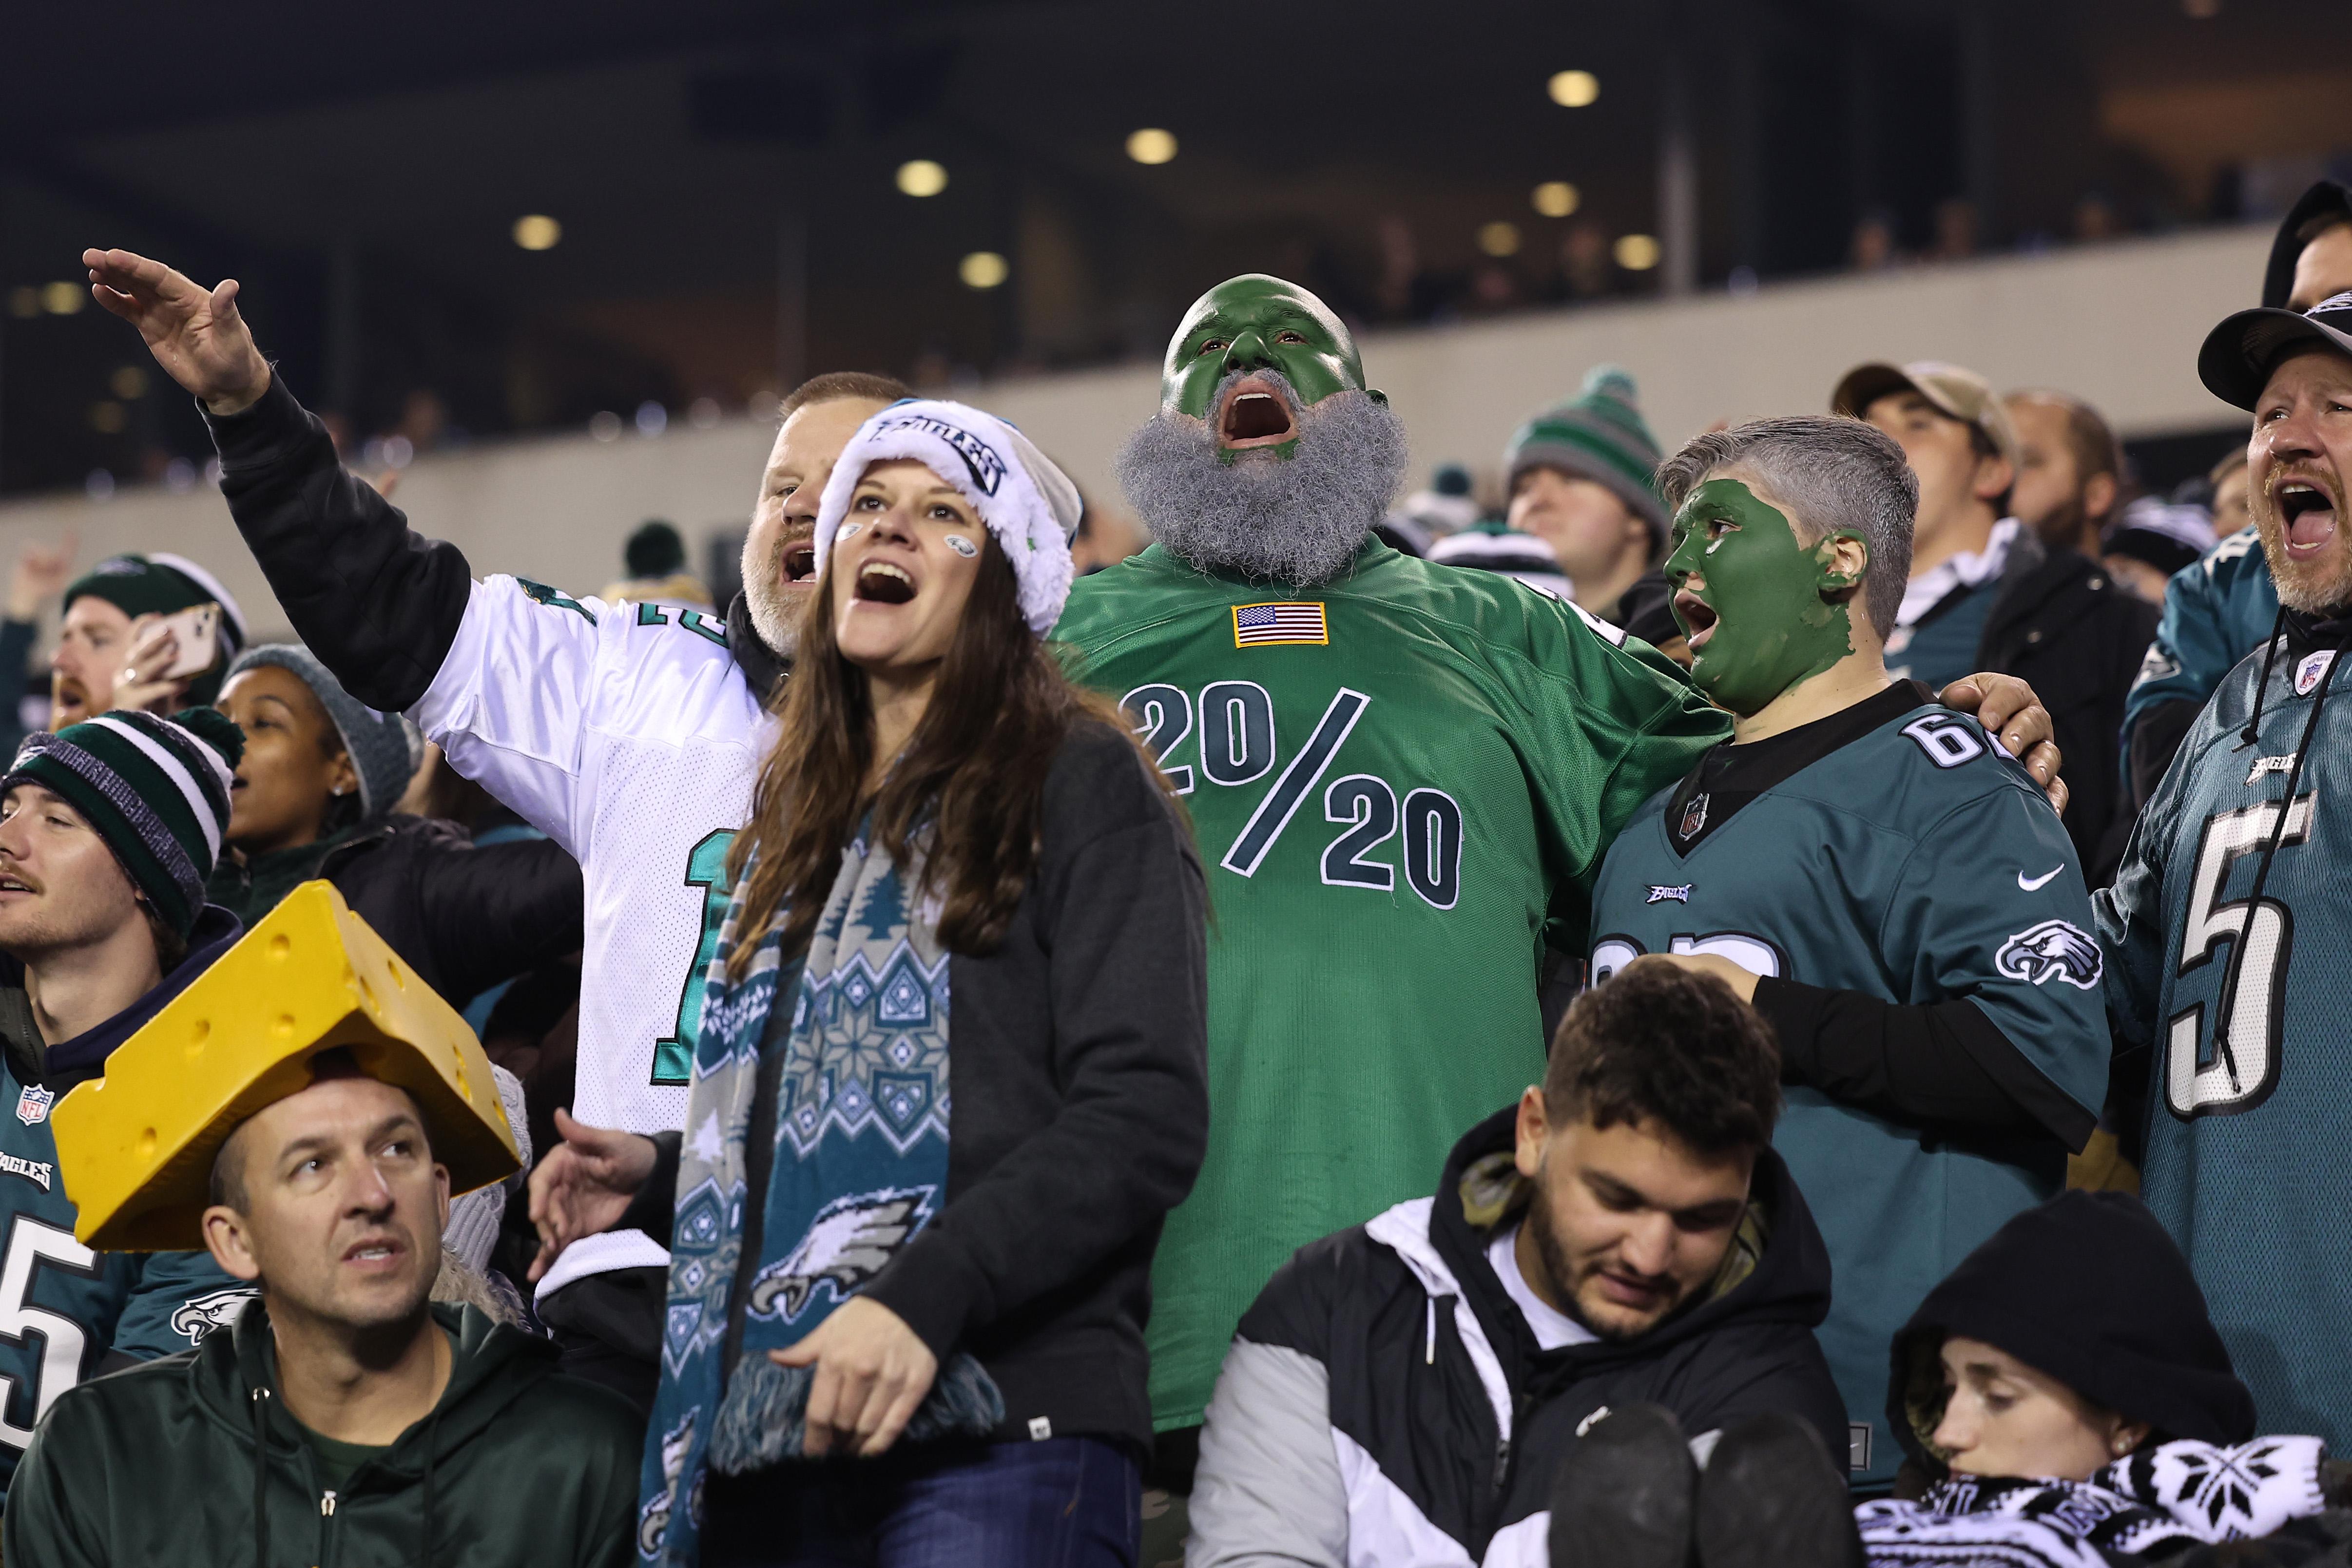 Two sports fans cheer for the Eagles.